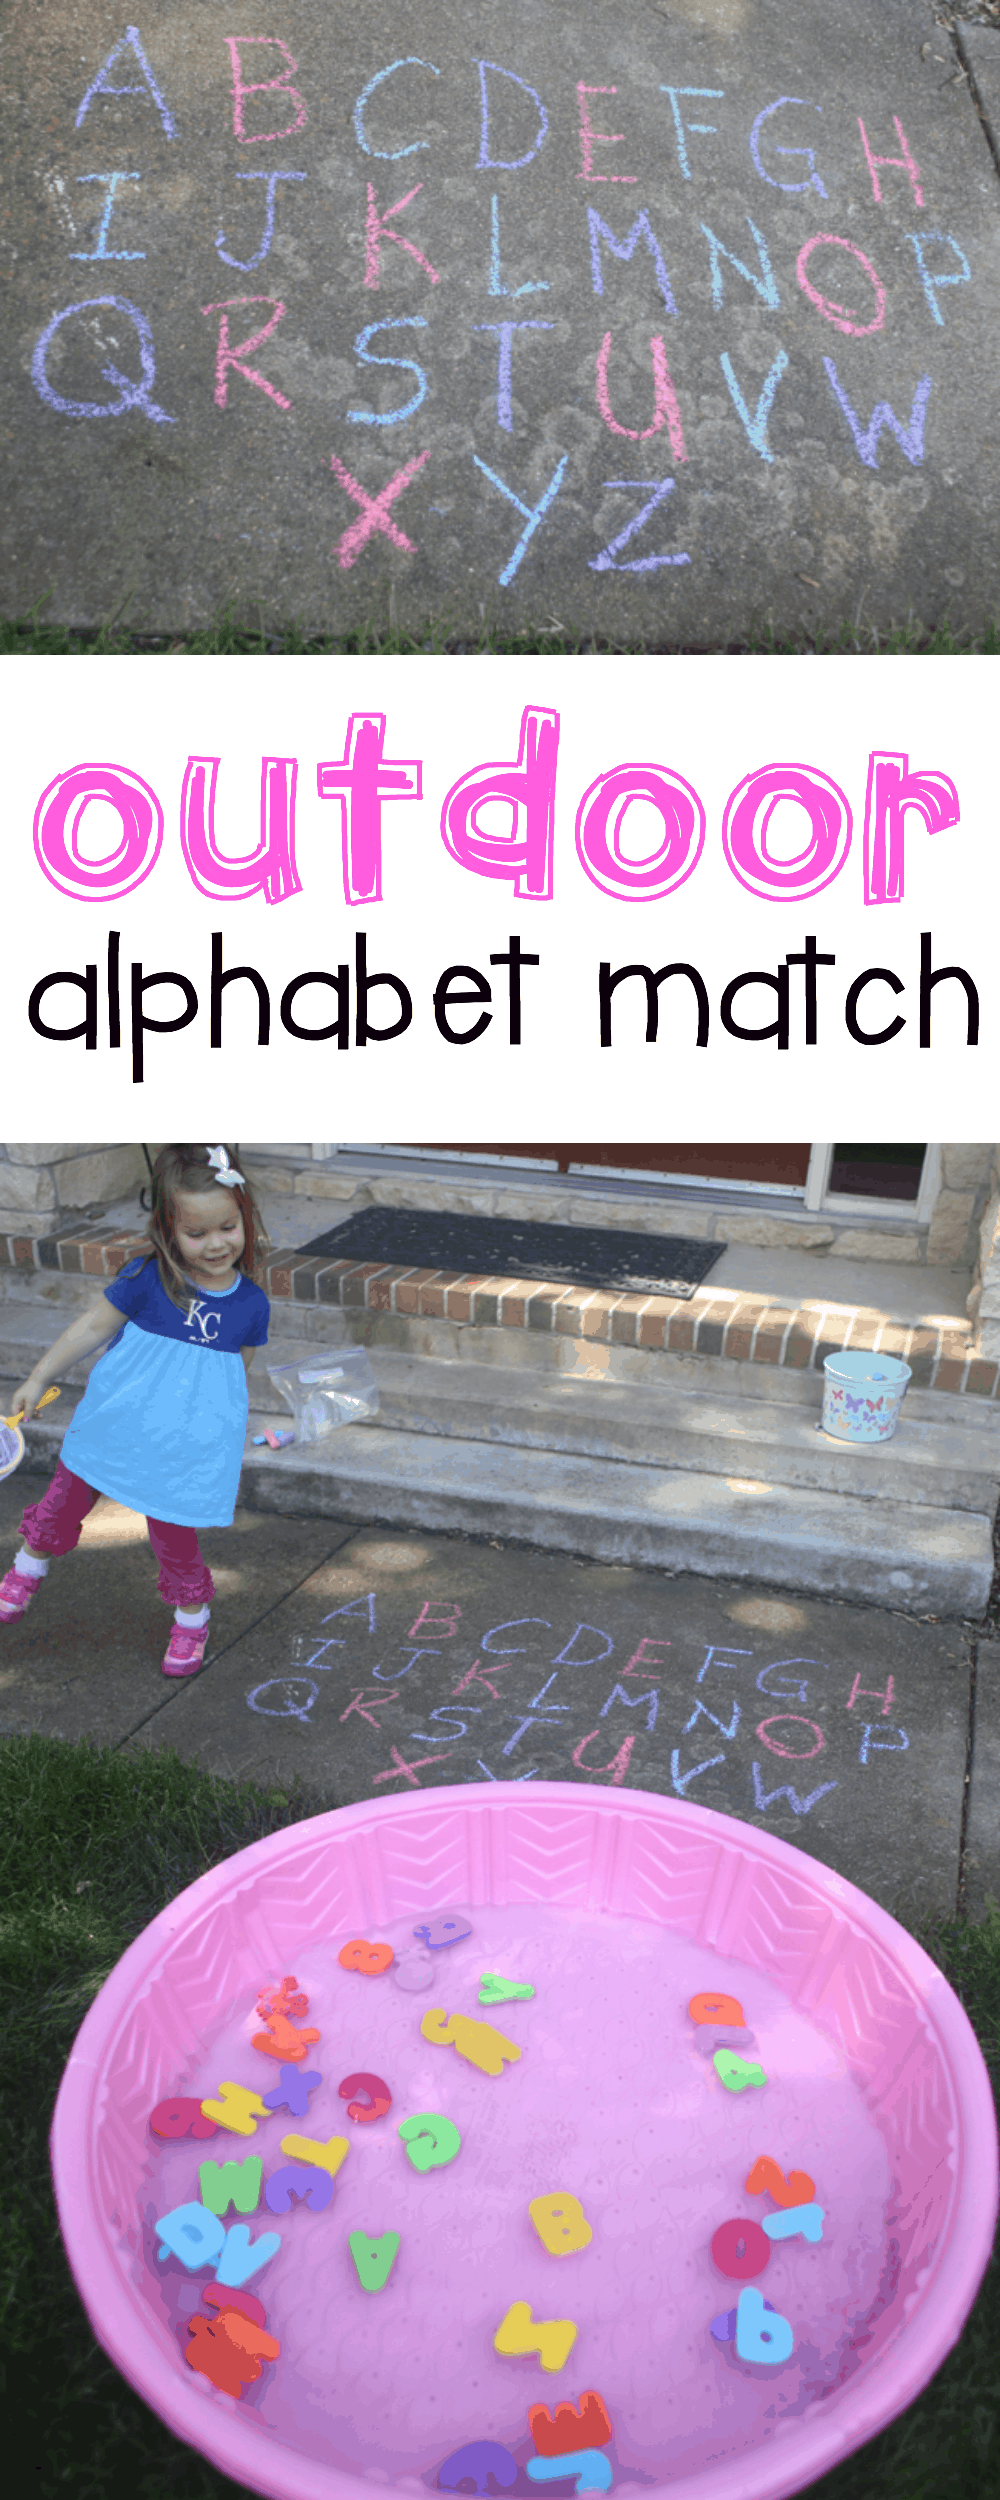 Outdoor Alphabet Match for Toddlers